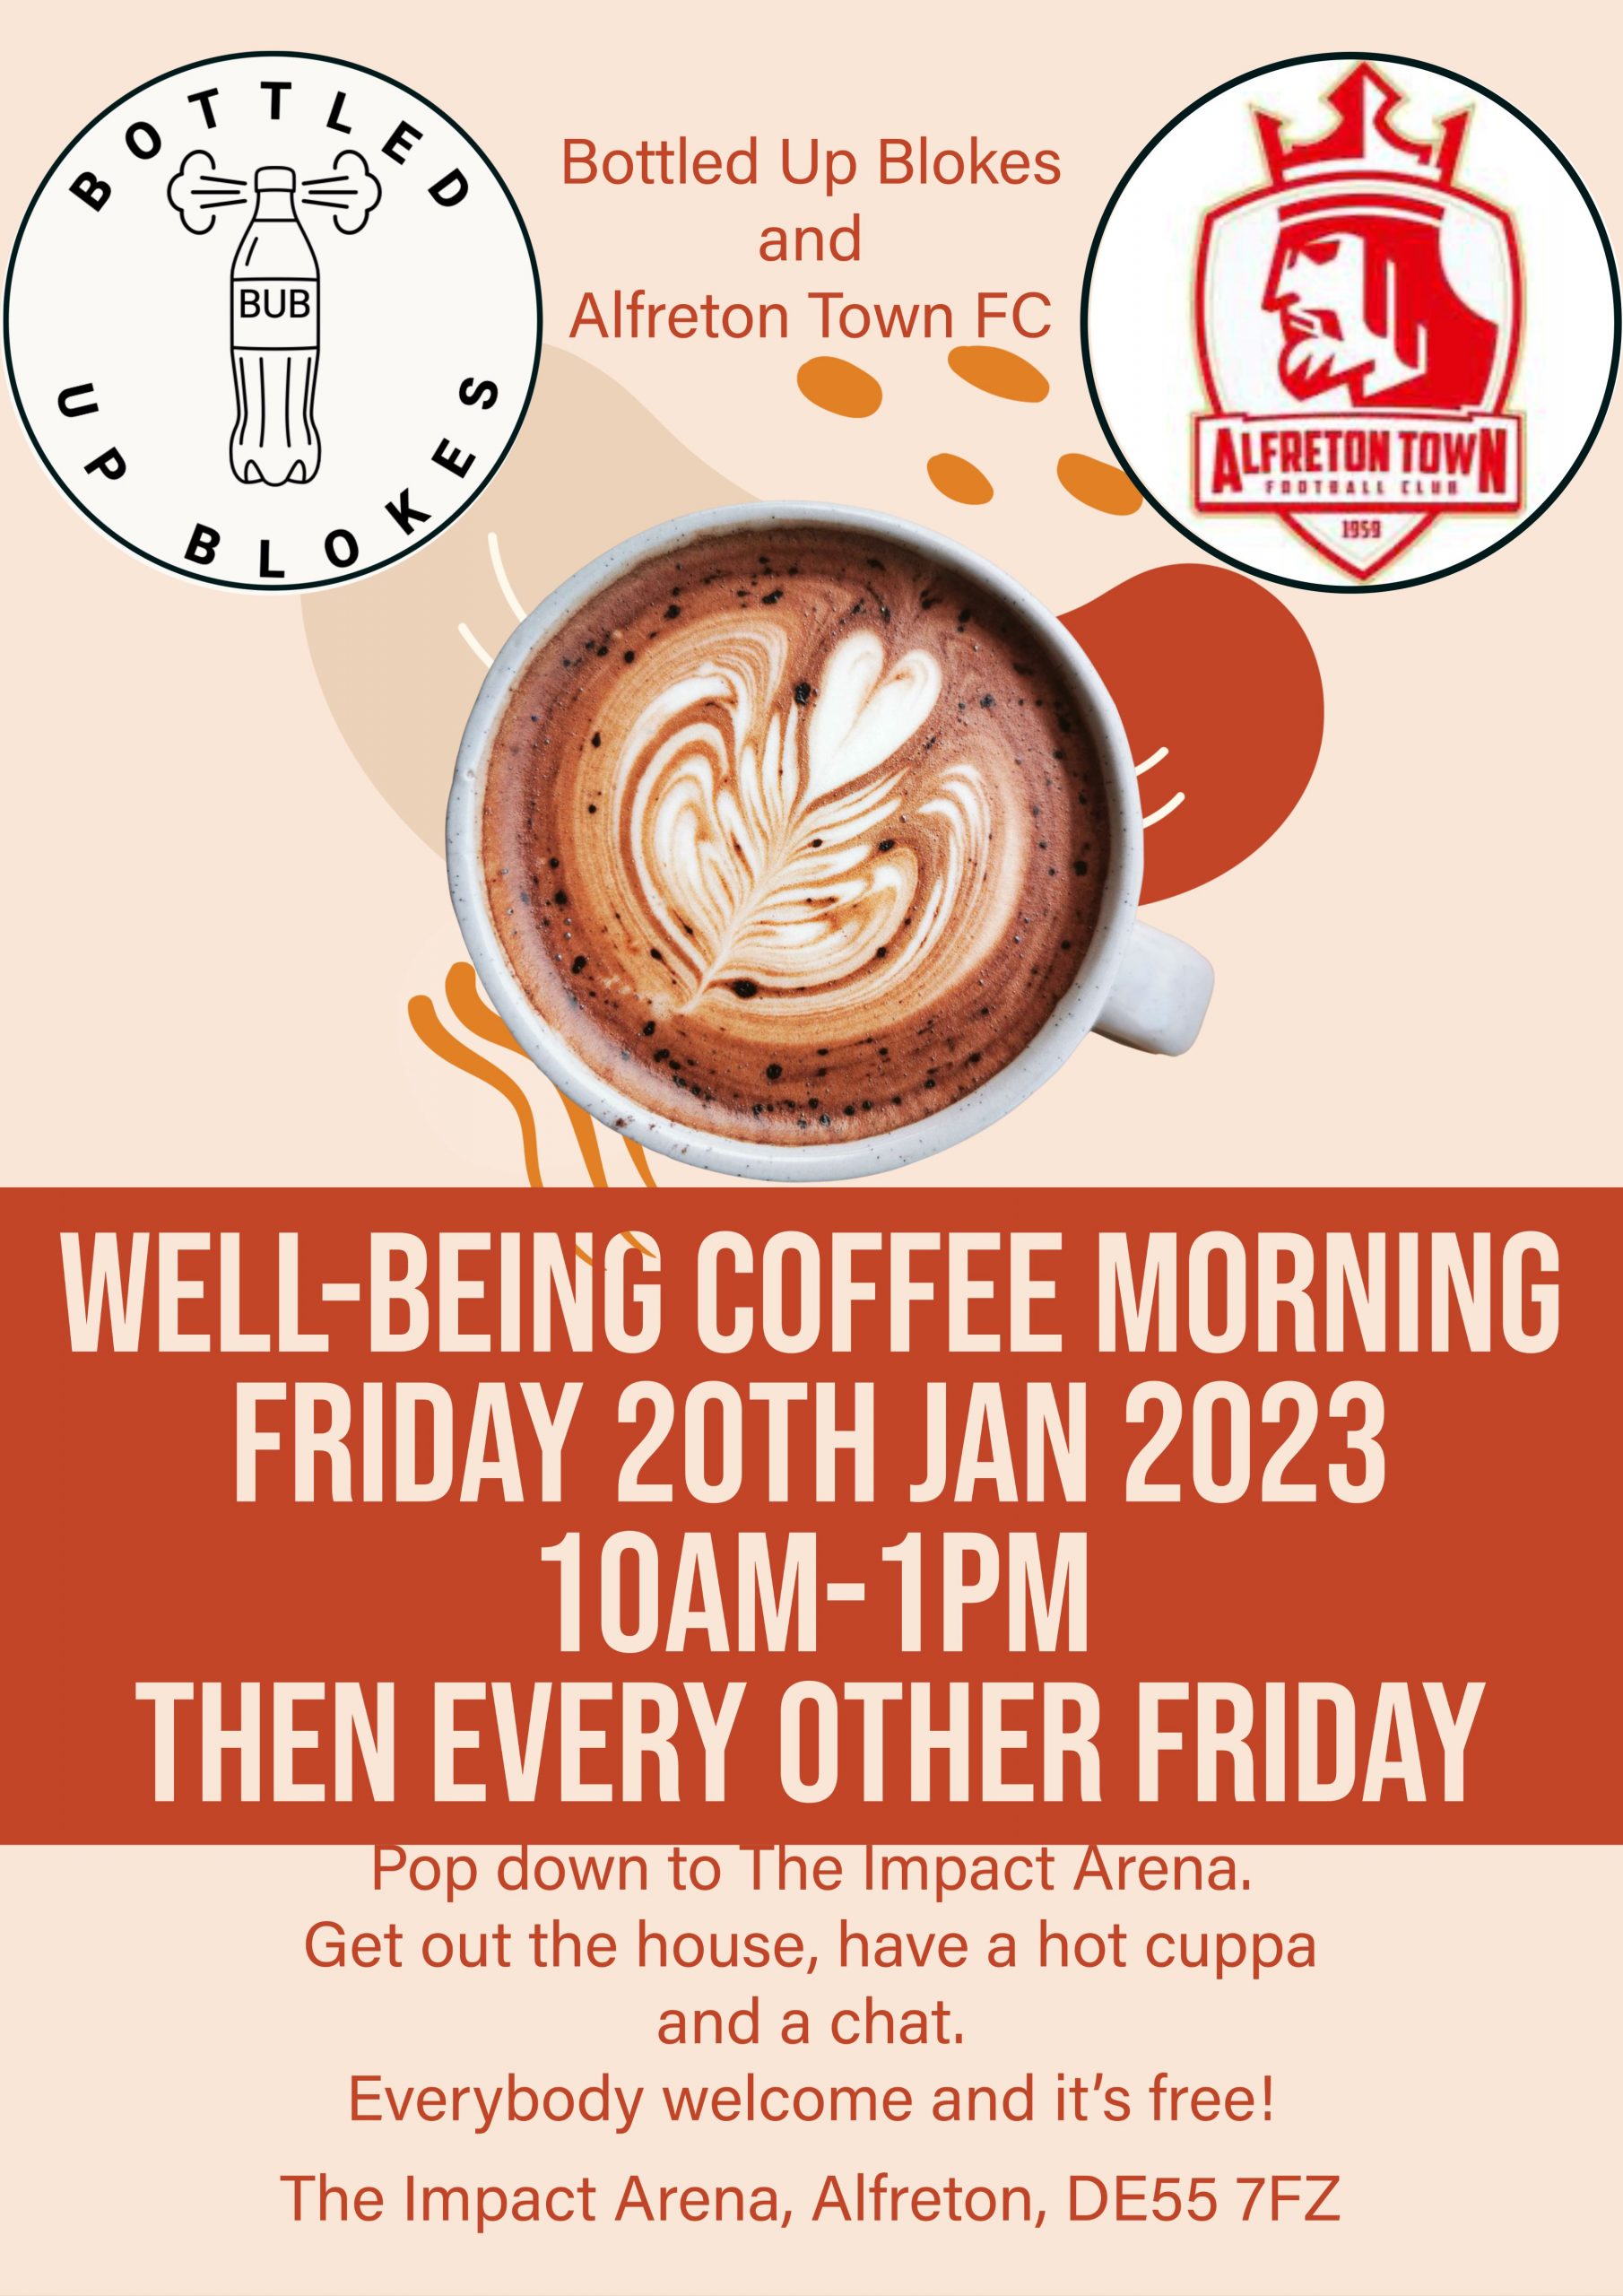 Bottled Up Blokes will host a wellbeing coffee morning at Alfreton Town FC